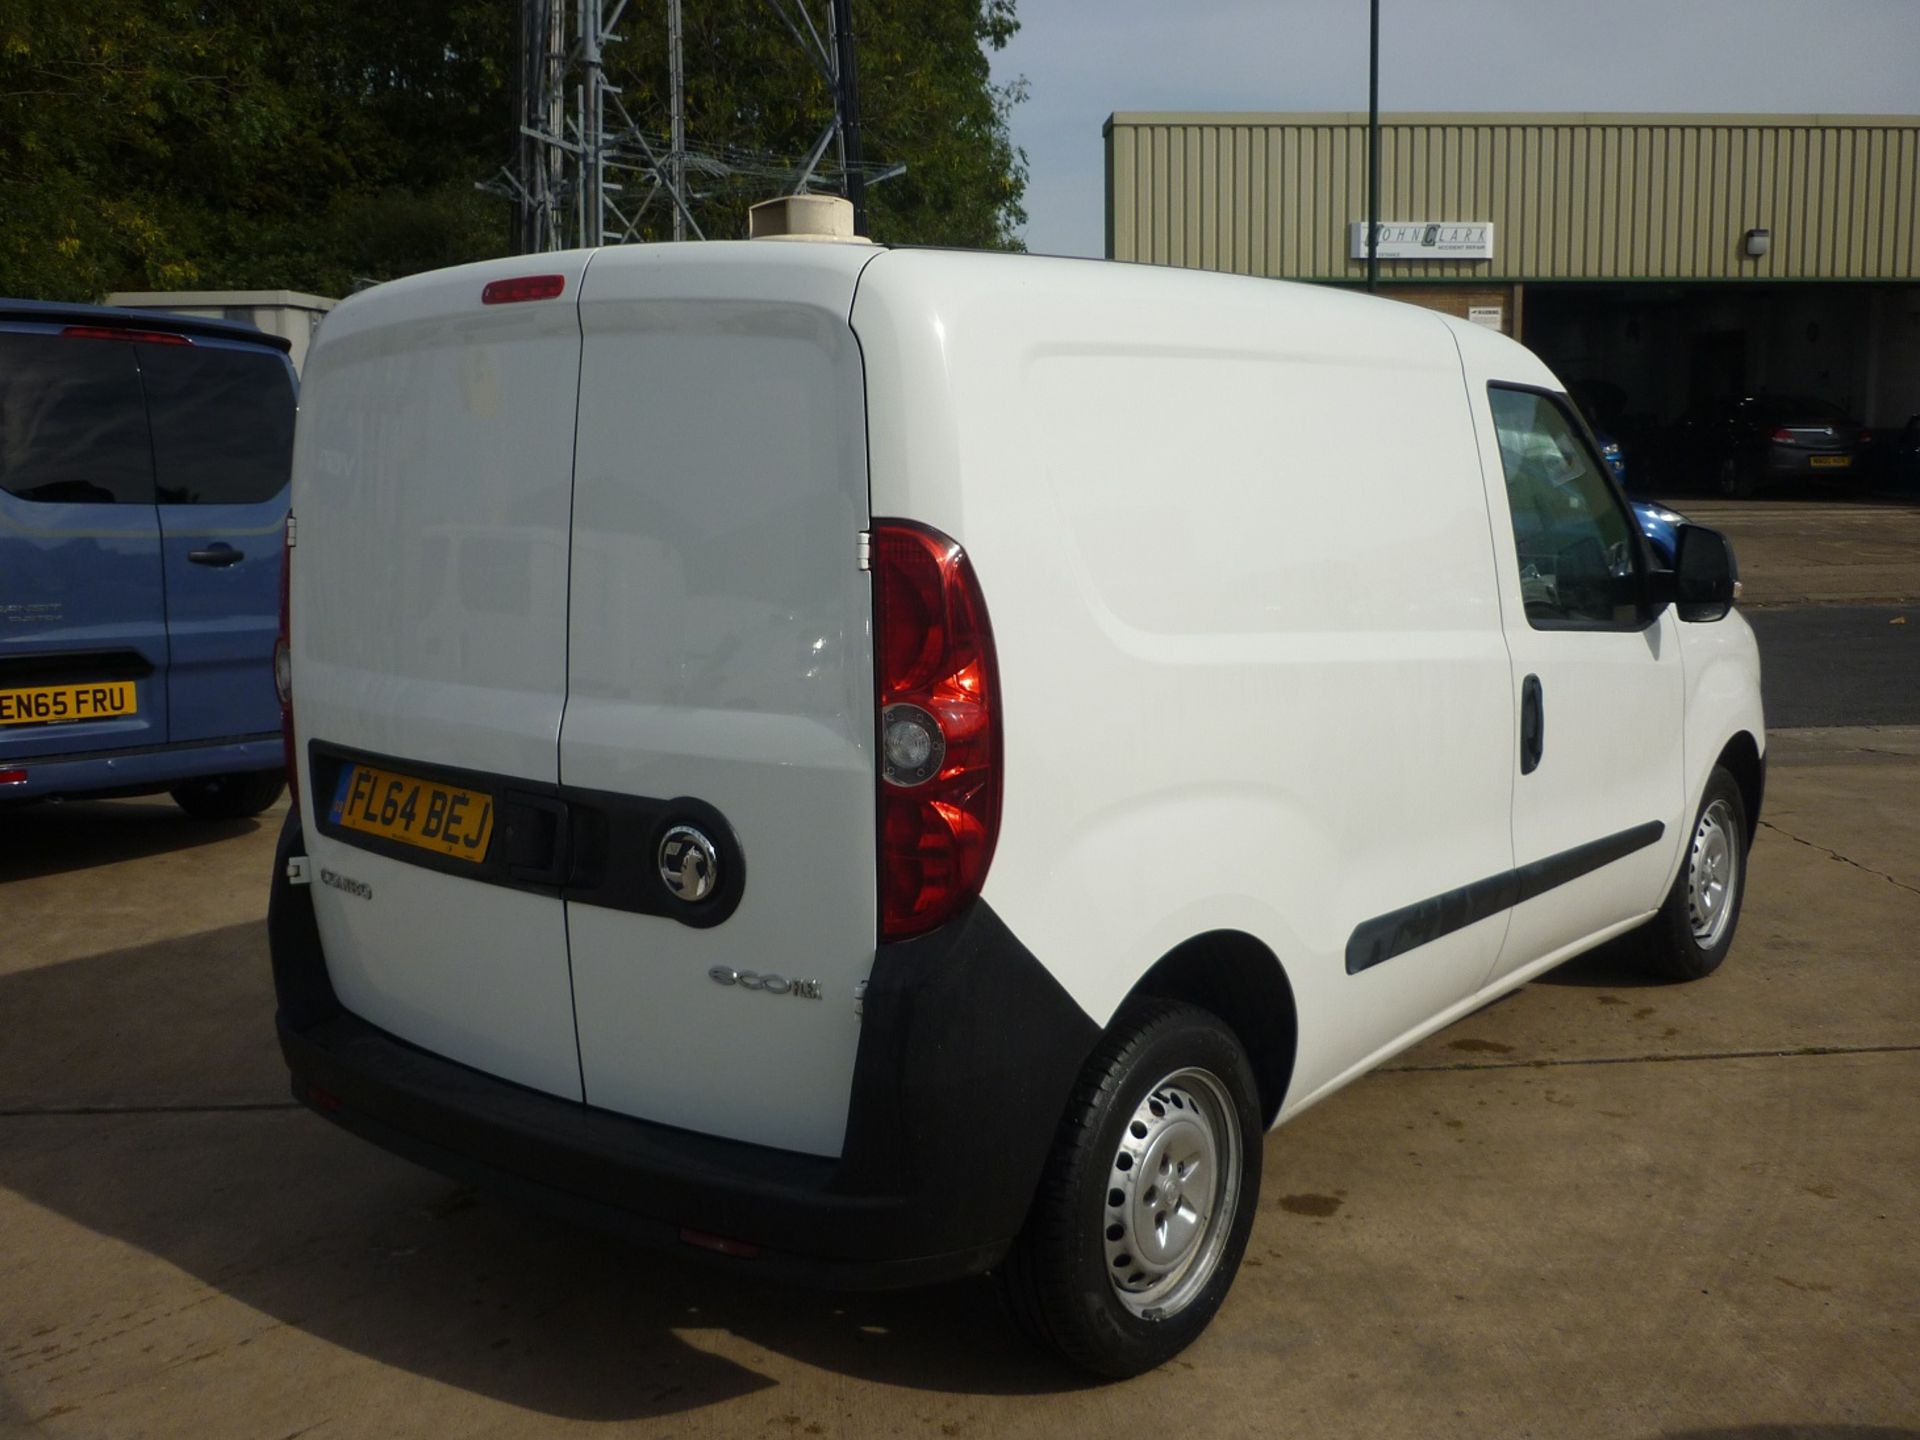 2014/64 REG VAUXHALL COMBO 2000 L1H1 CDTI SS E DIESEL PANEL VAN, SHOWING 0 FORMER KEEPERS *PLUS VAT* - Image 2 of 4